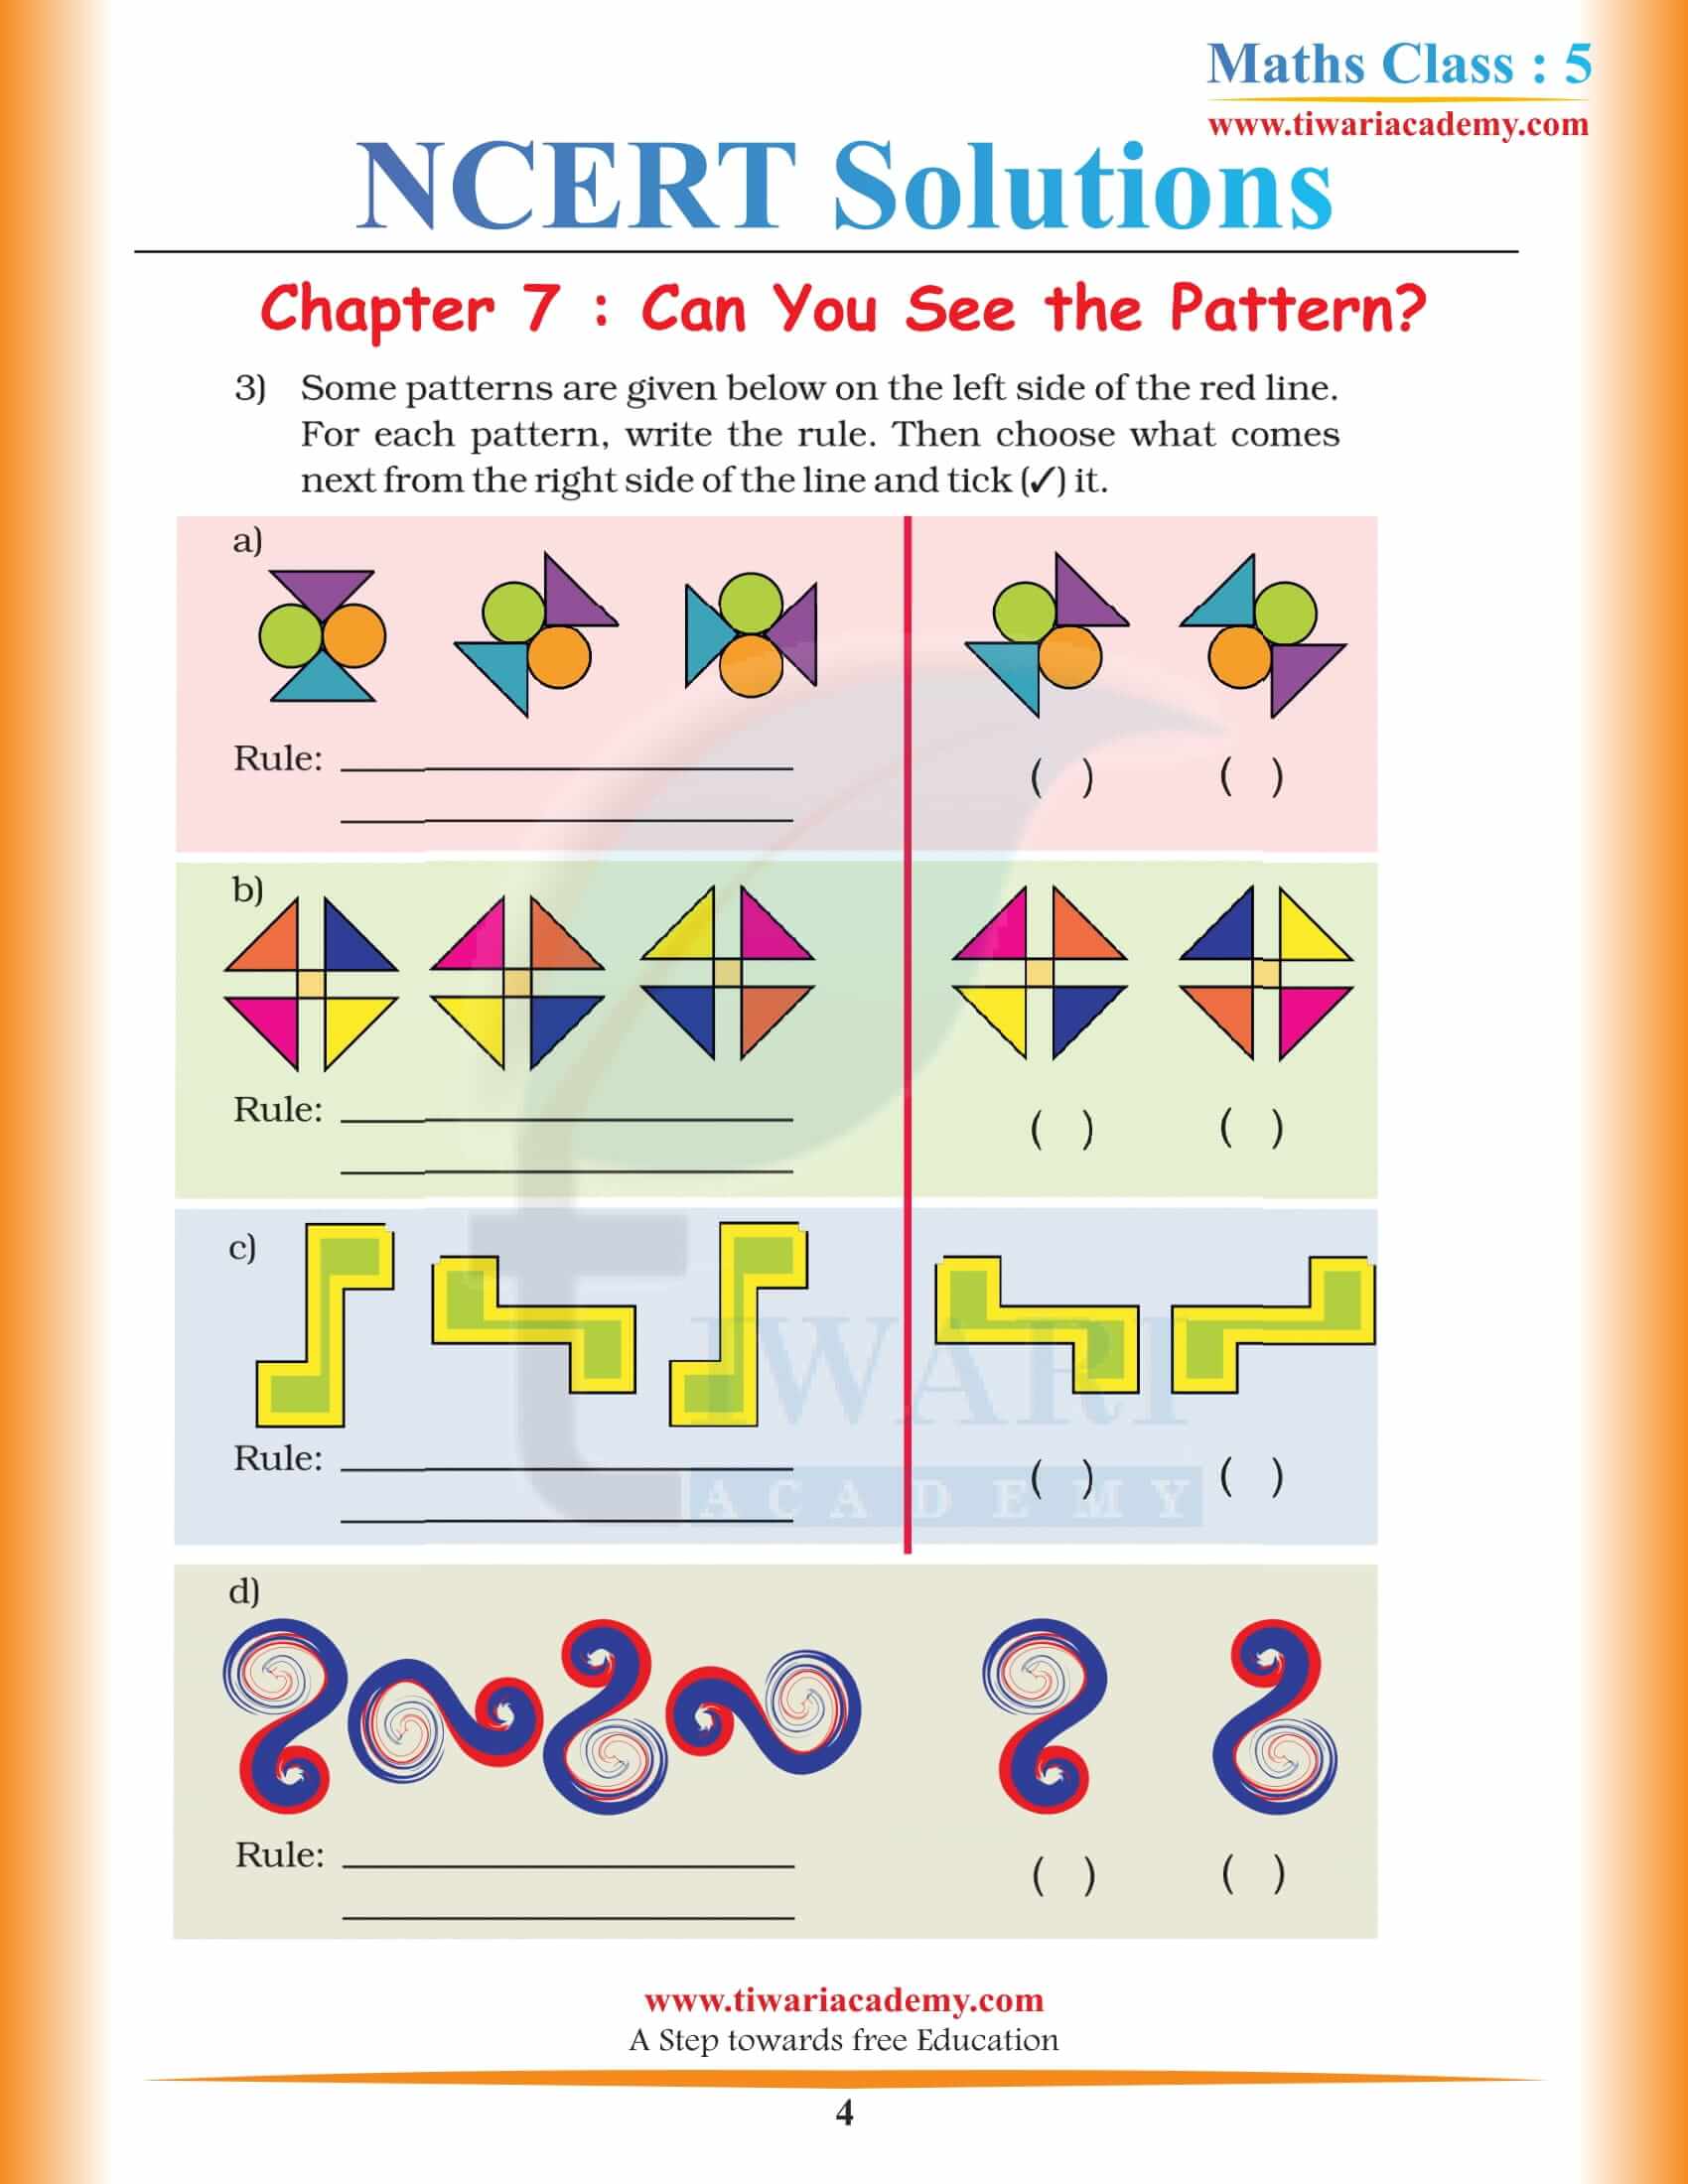 NCERT Solutions for Class 5 Maths Chapter 7 free download